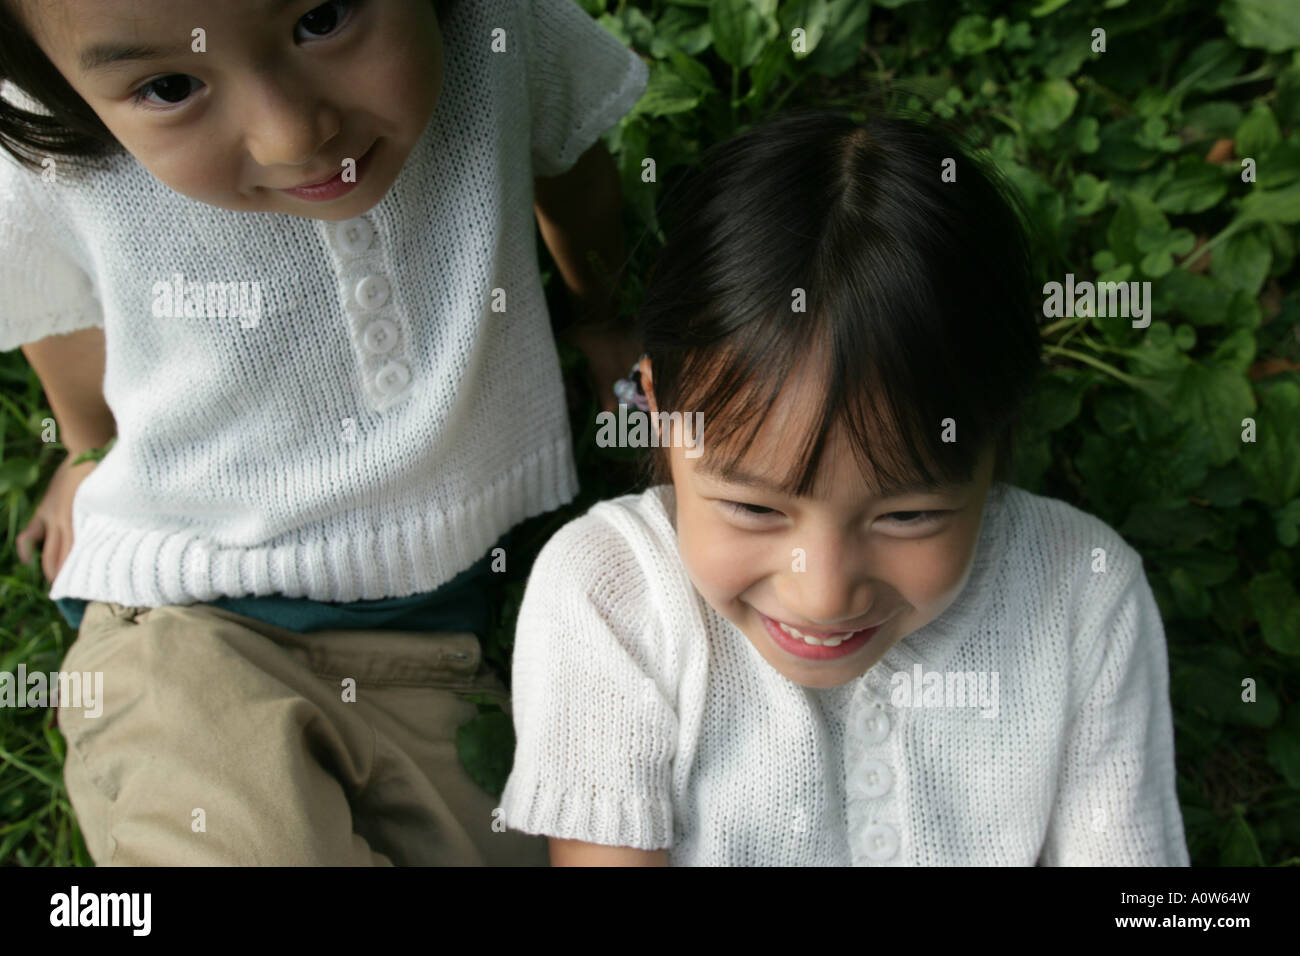 Close up of two girls Stock Photo